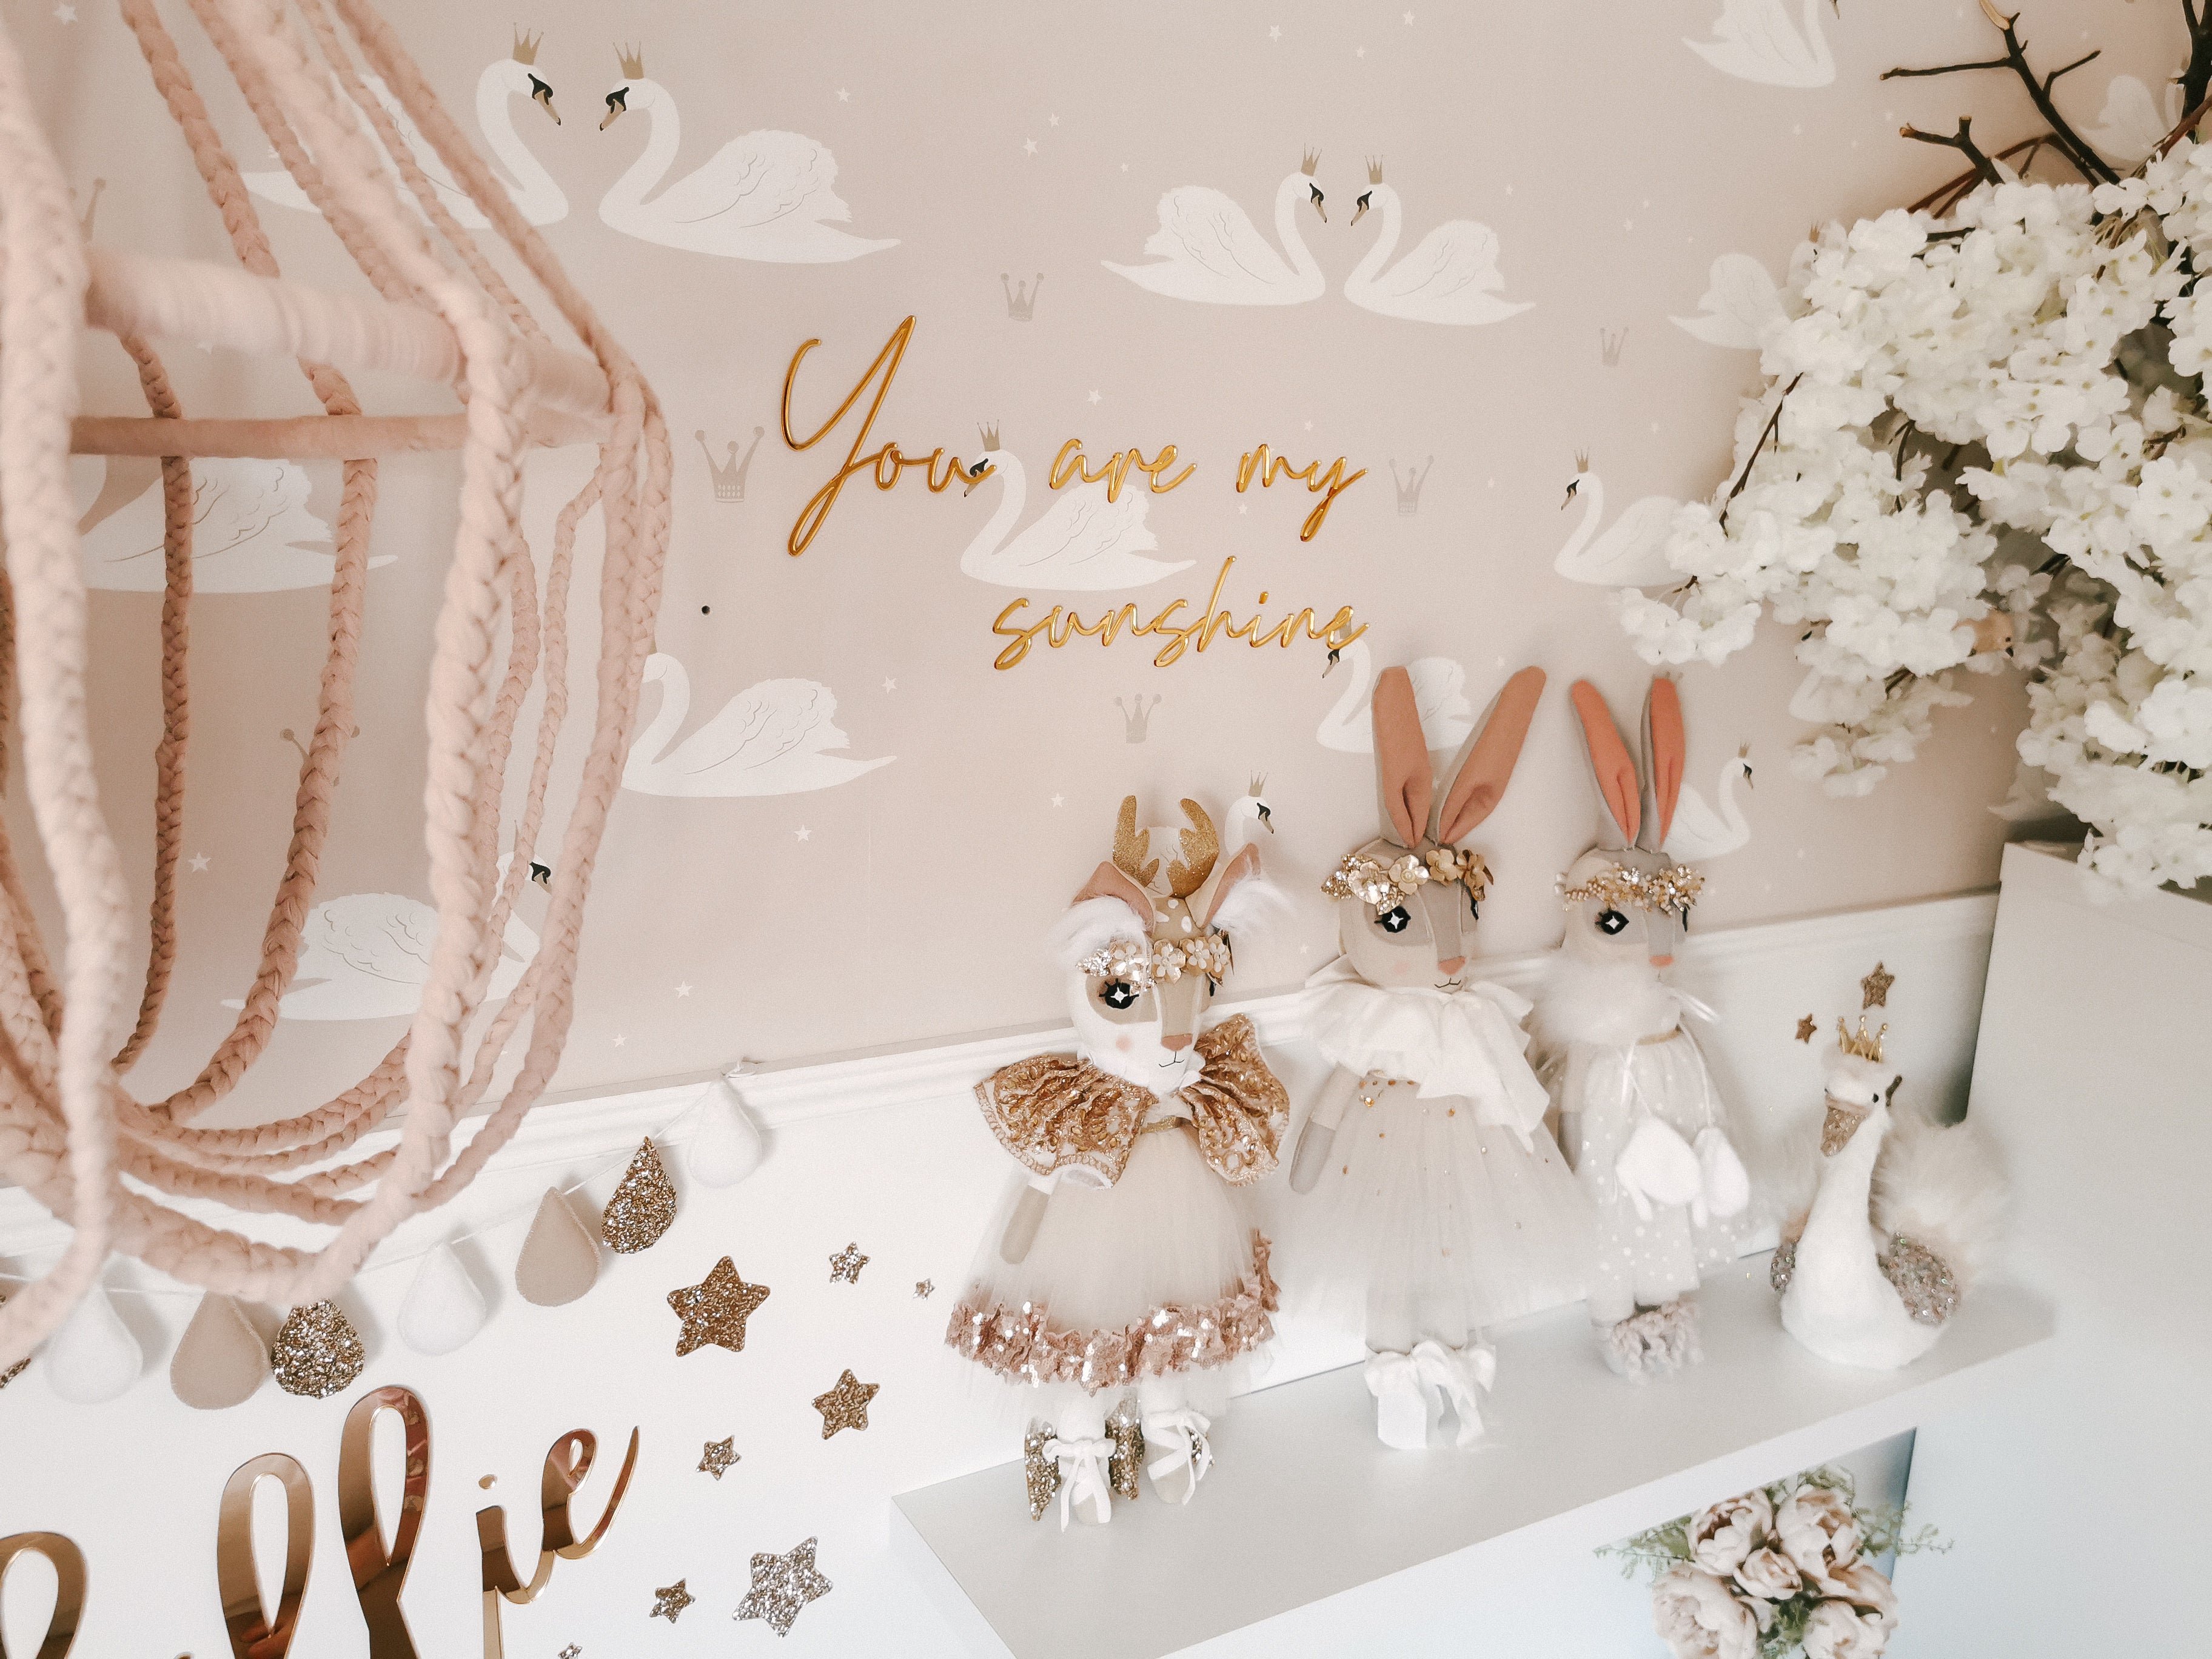 “You are my sunshine" Mirrored Wall Quote